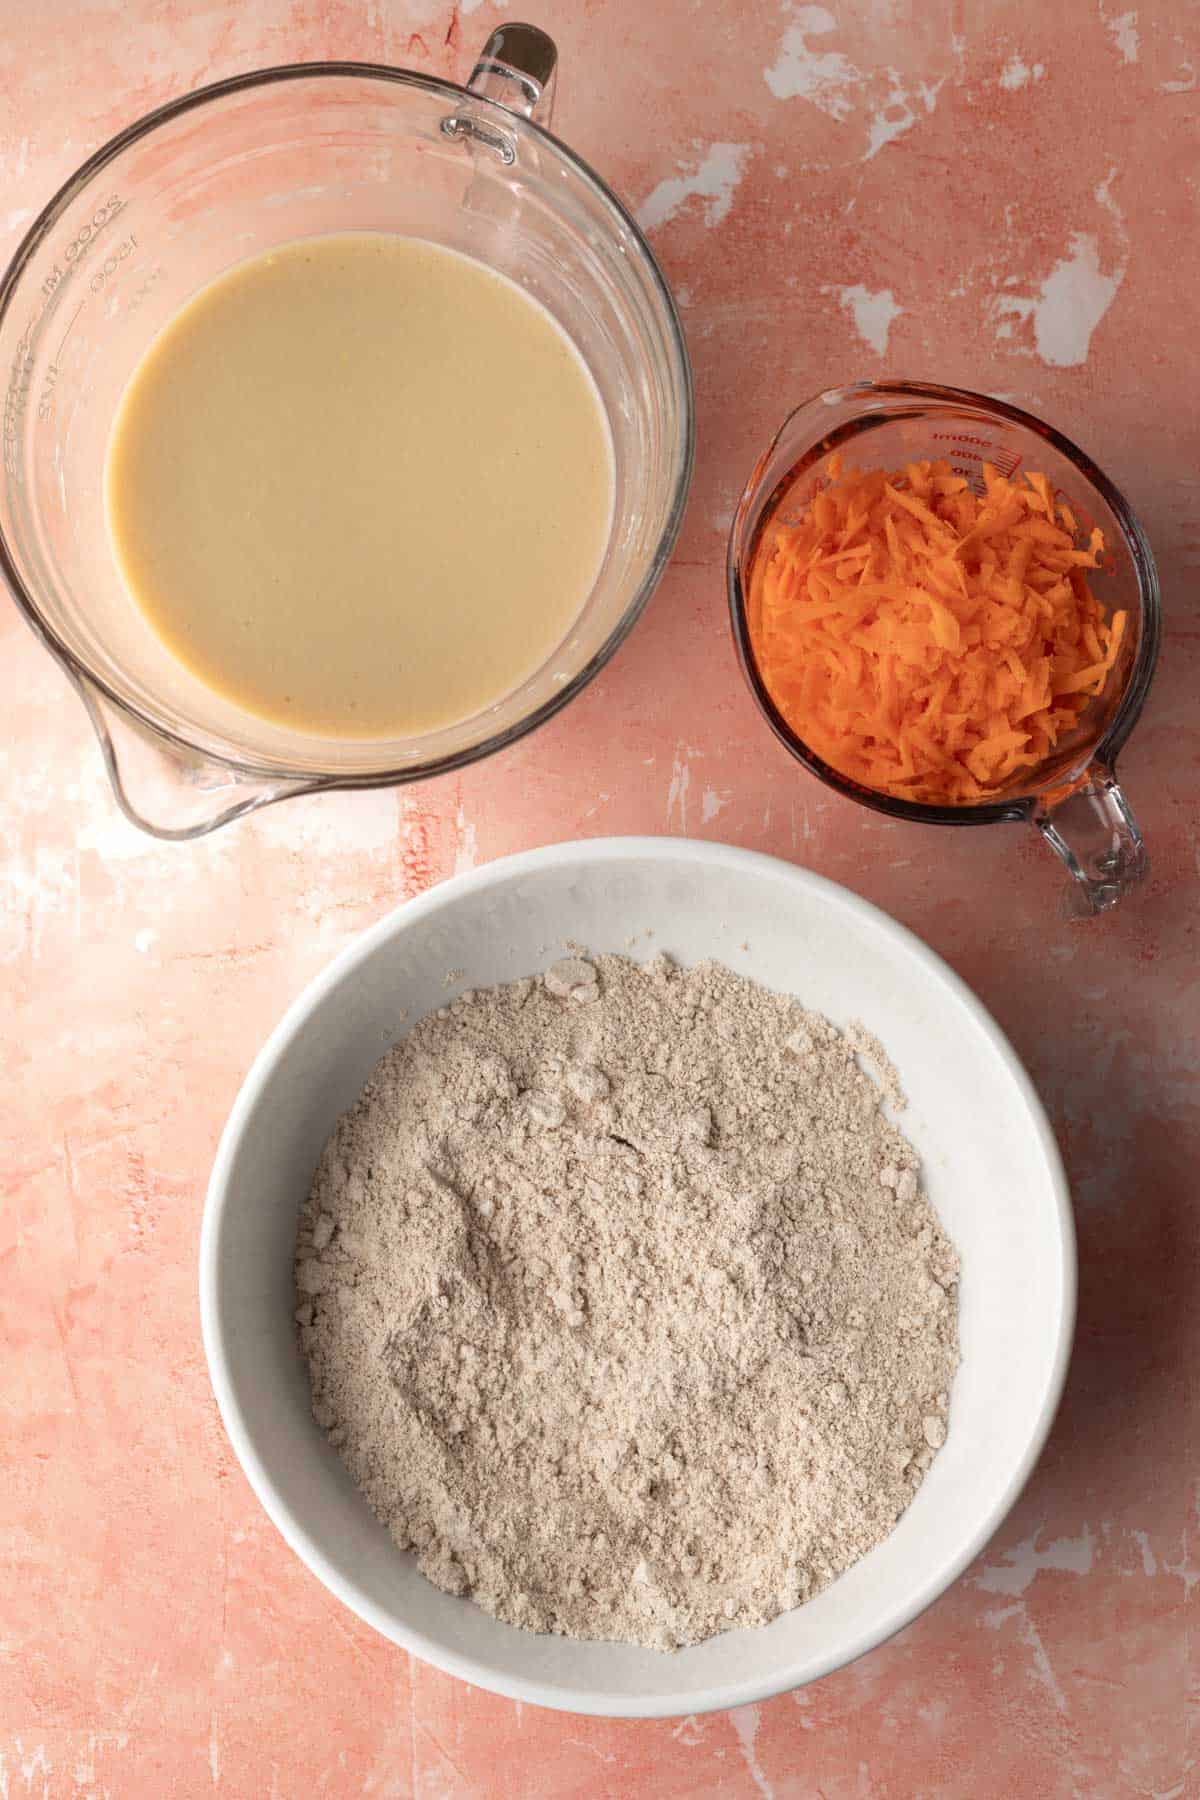 Two large mixing bowls filled with wet and dry ingredients plus a measuring cup with grated carrot.